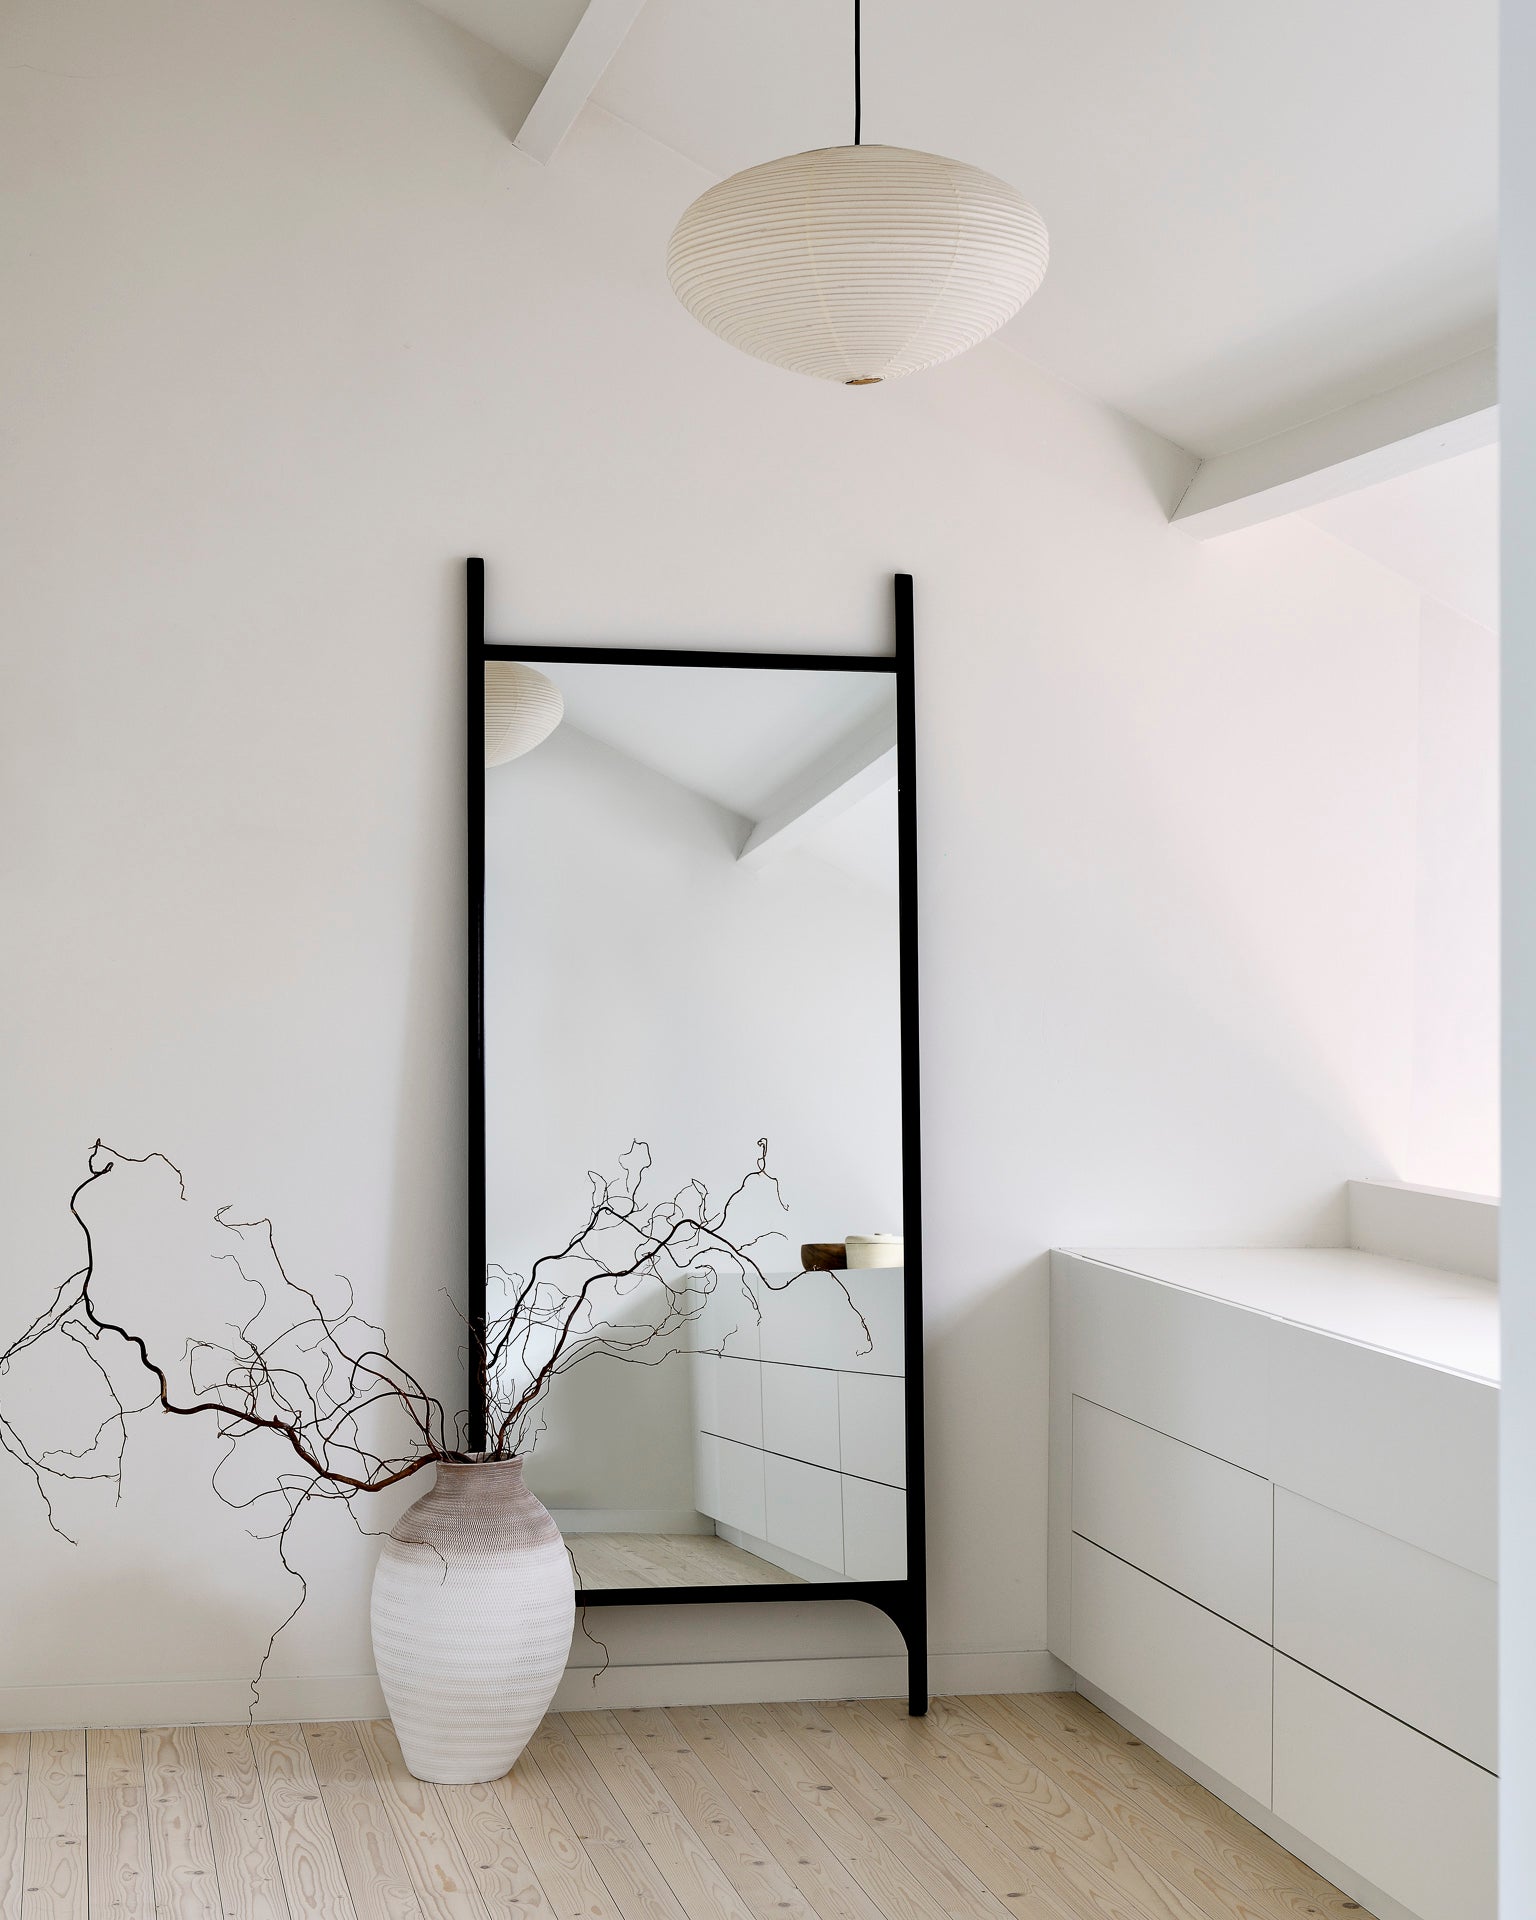 pi floor mirror by ethnicraft at adorn.house